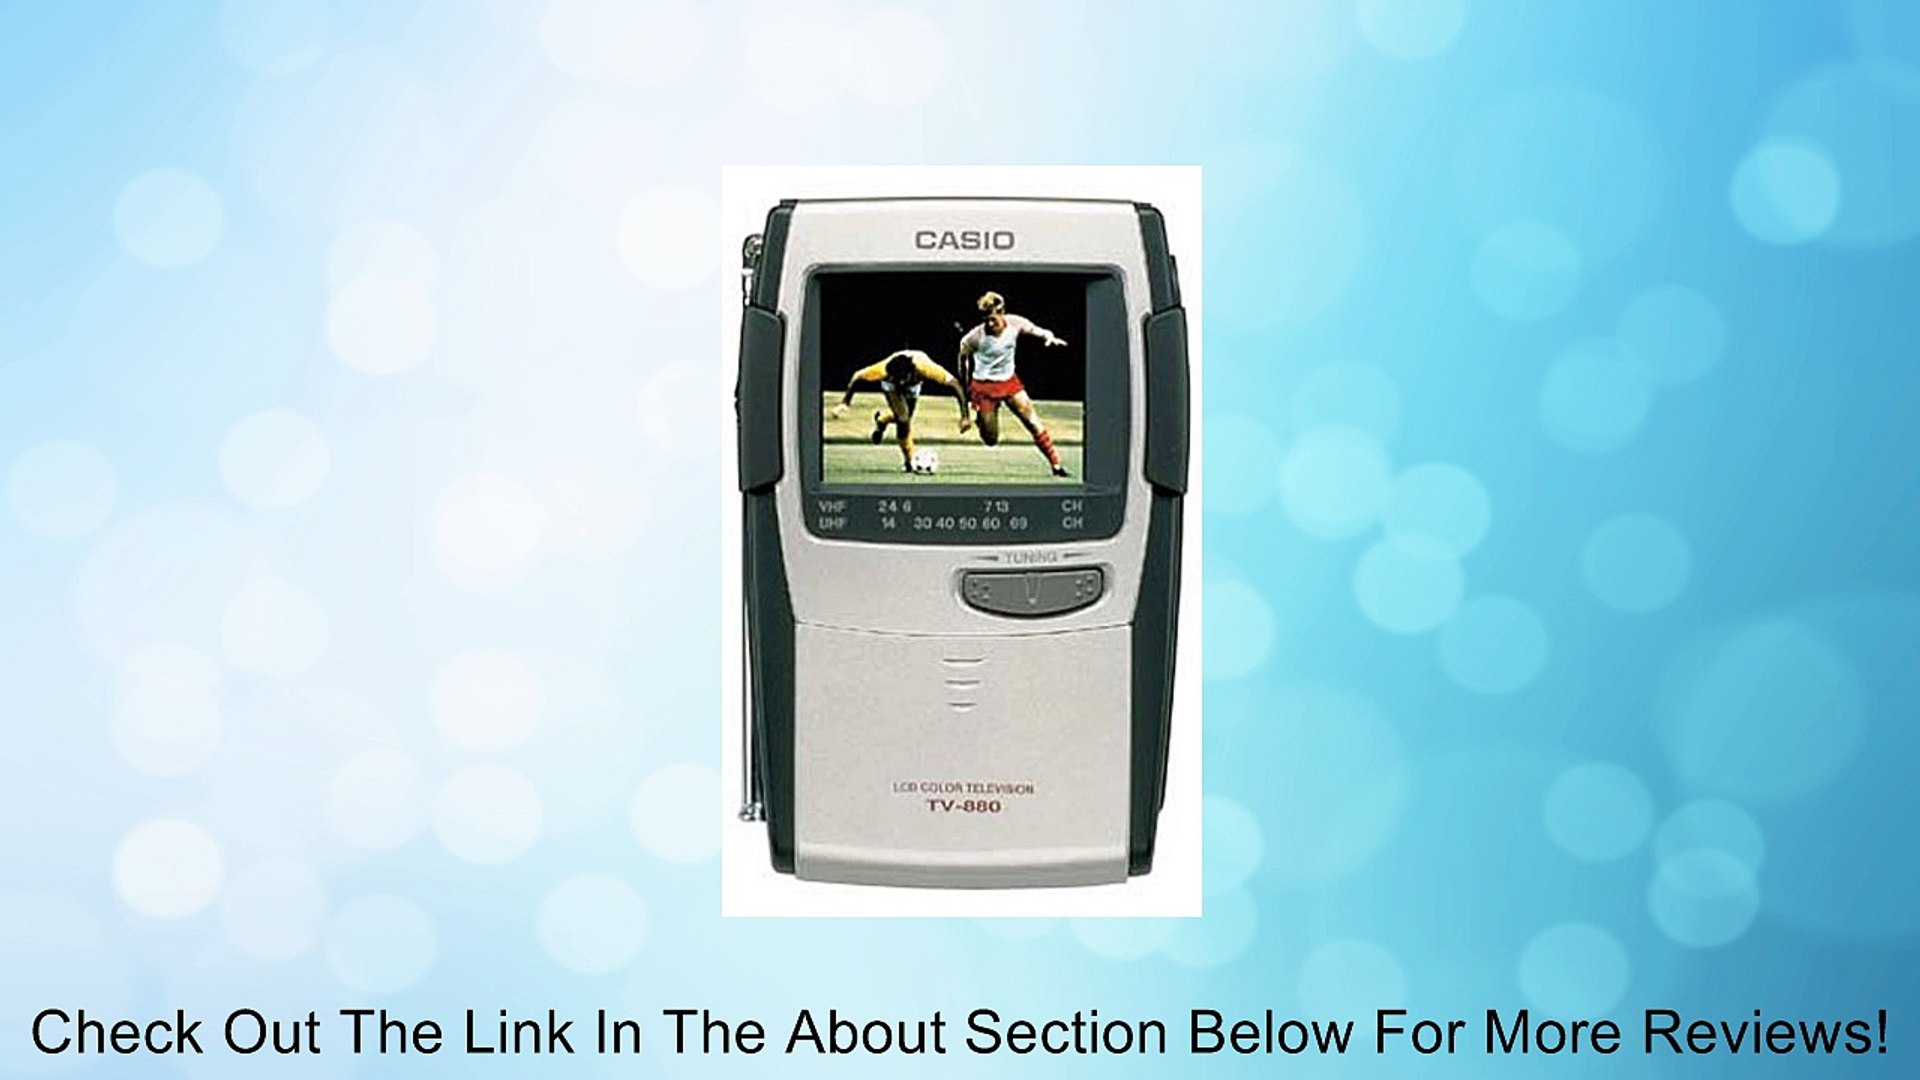 Casio TV-880 2.3" Portable Handheld Color TV Review - Video Dailymotion